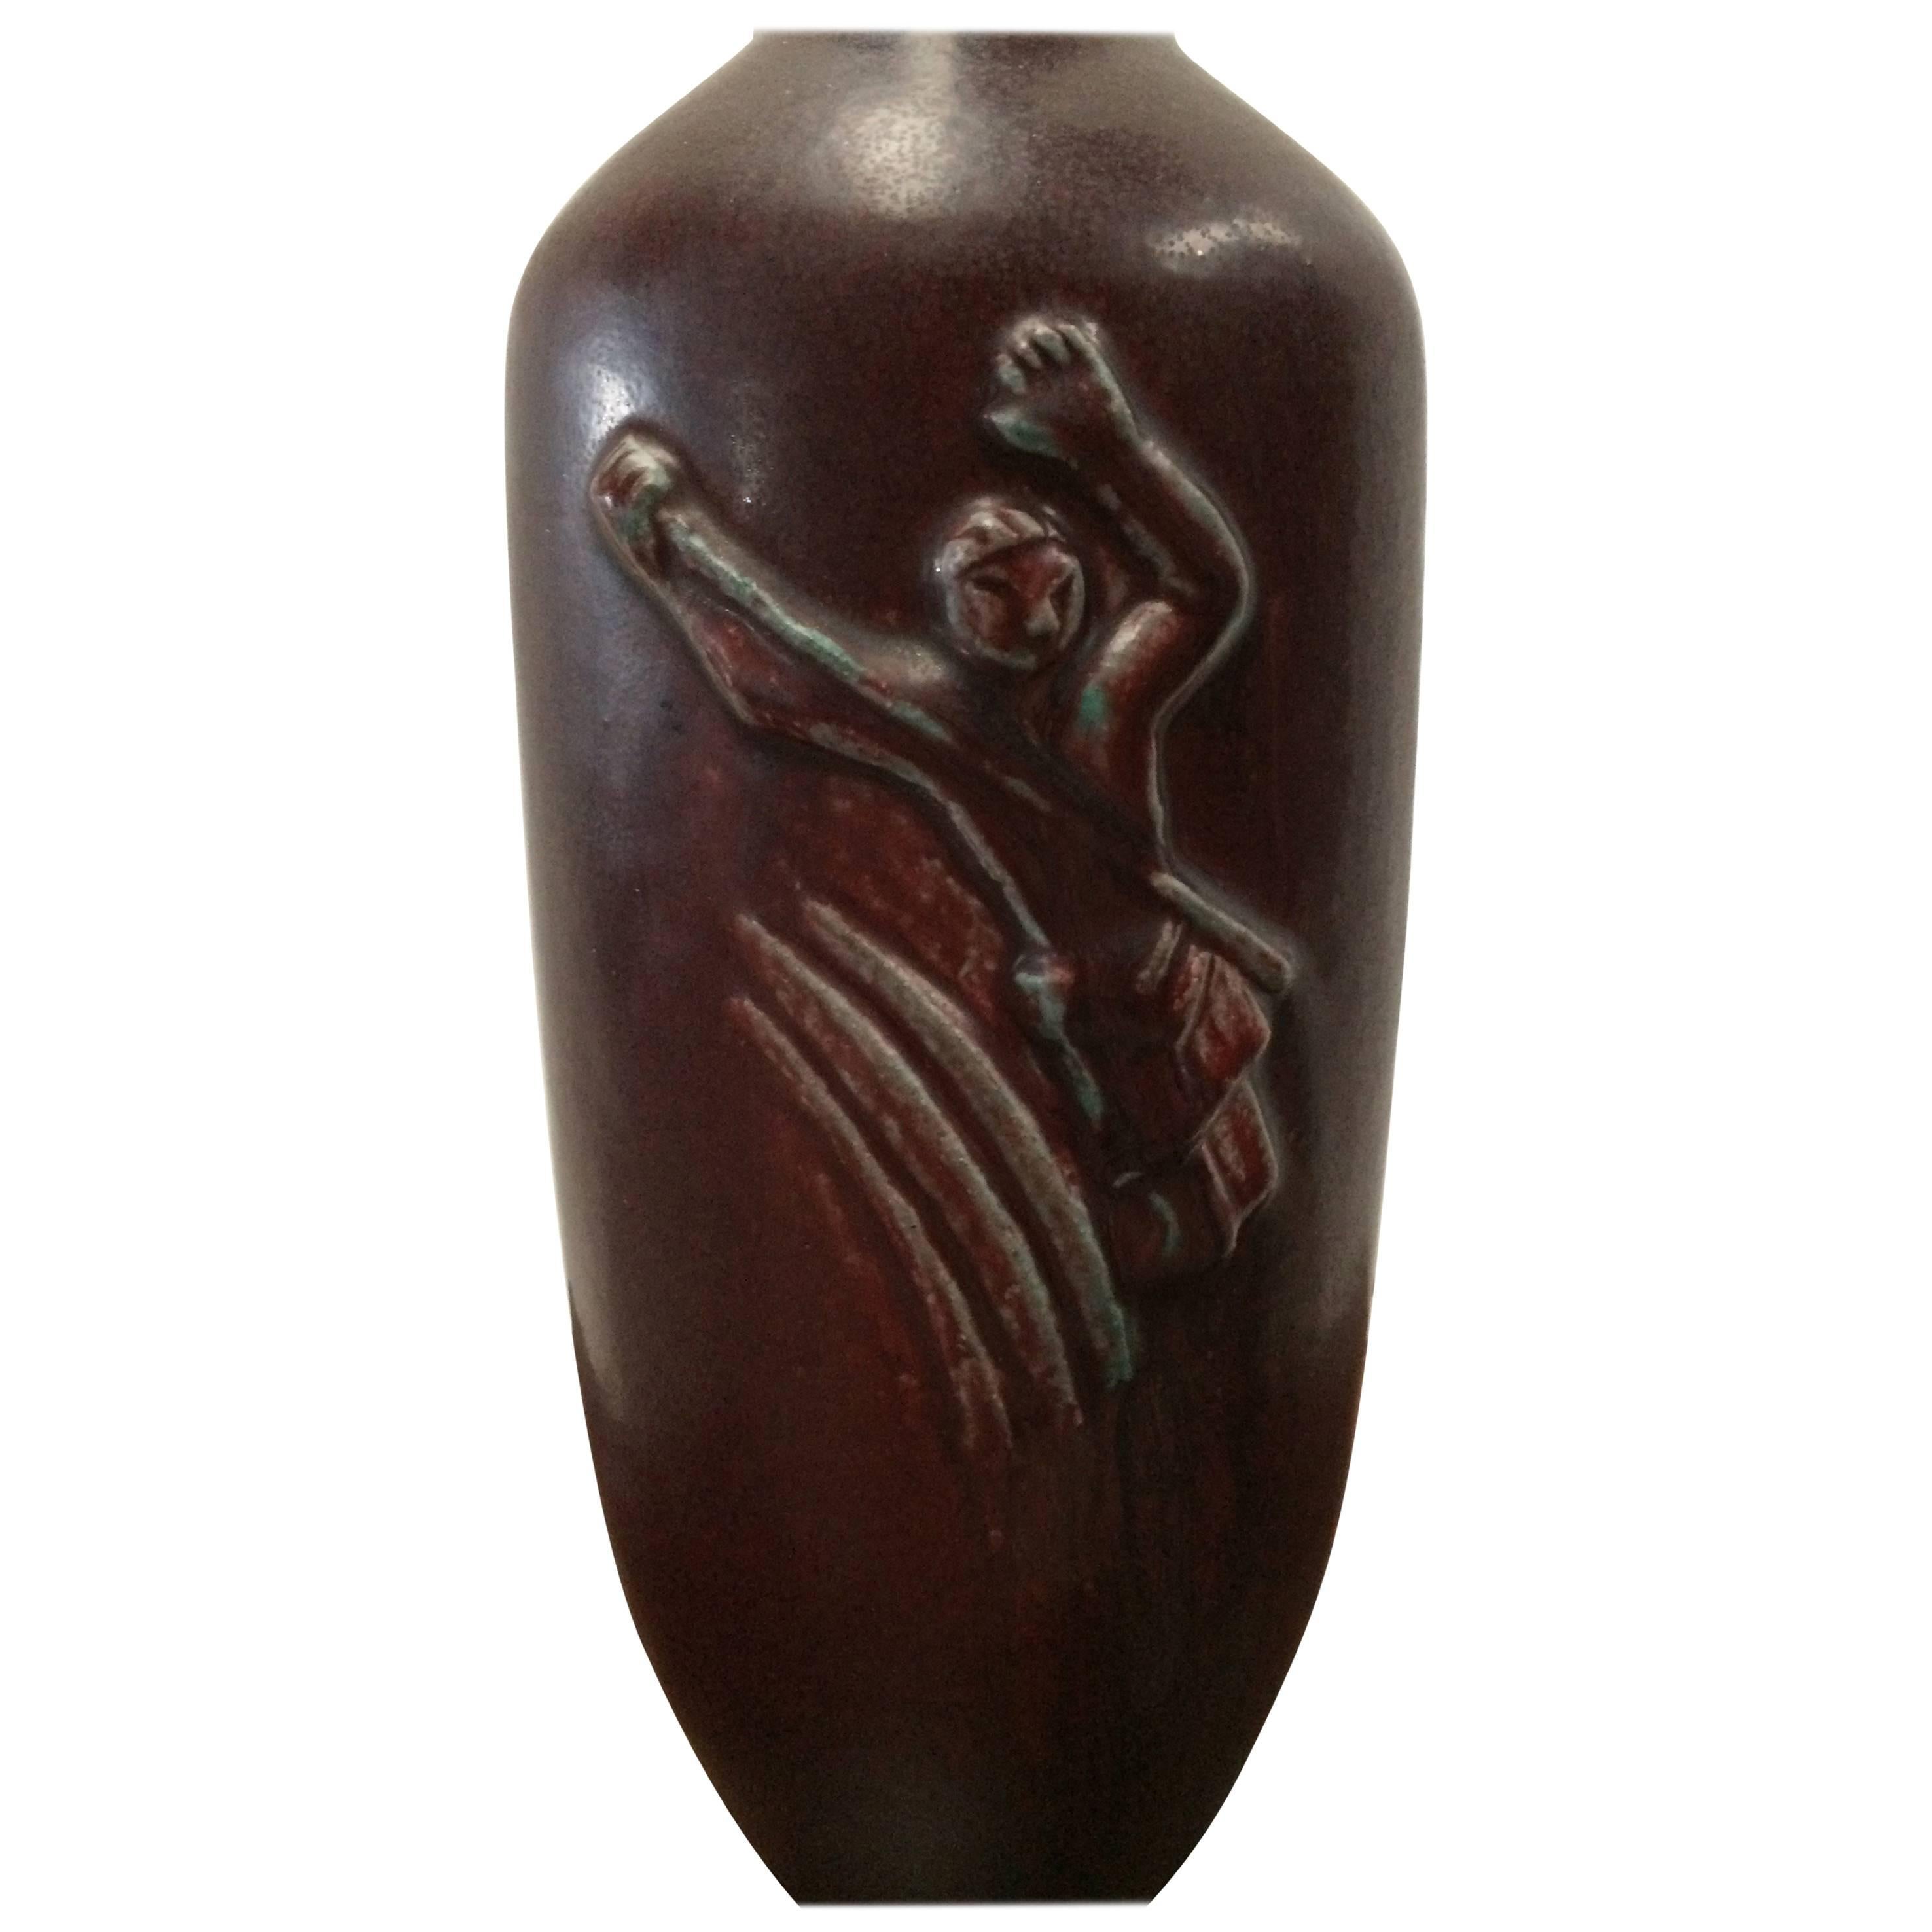 Large oxblood stoneware vase with relief decorations depicting David with lion, 

Base marked: Royal Copenhagen, Painted three wave lines, Jais and incised 21025

Period 1920-1940.

Like all of our upholstered items the chair can also be newly